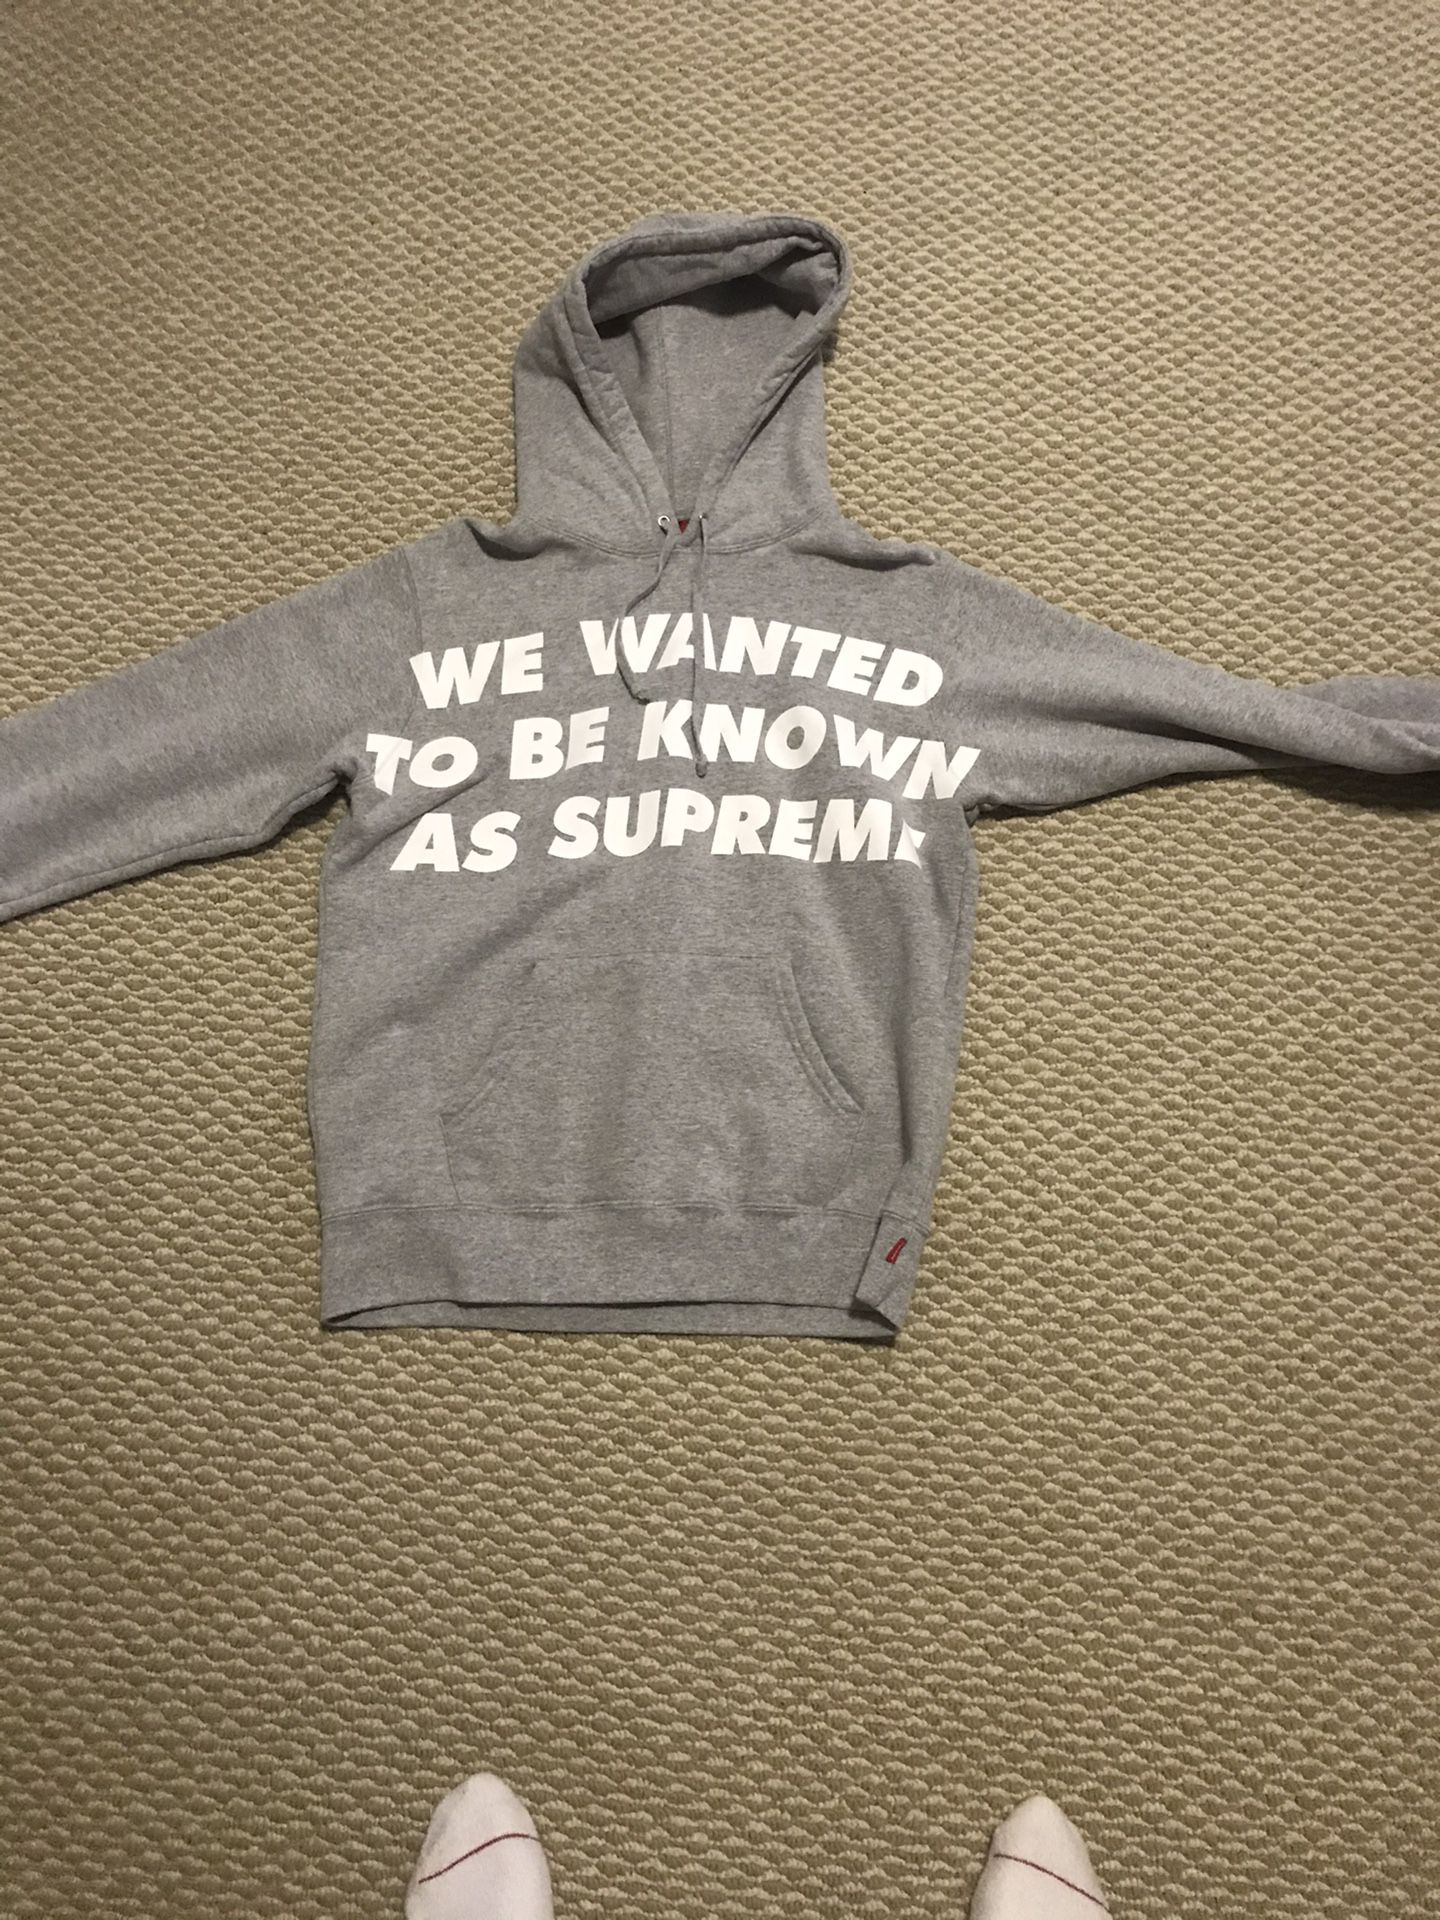 We wanted to be known as supreme hoodie mens medium washed once never worn